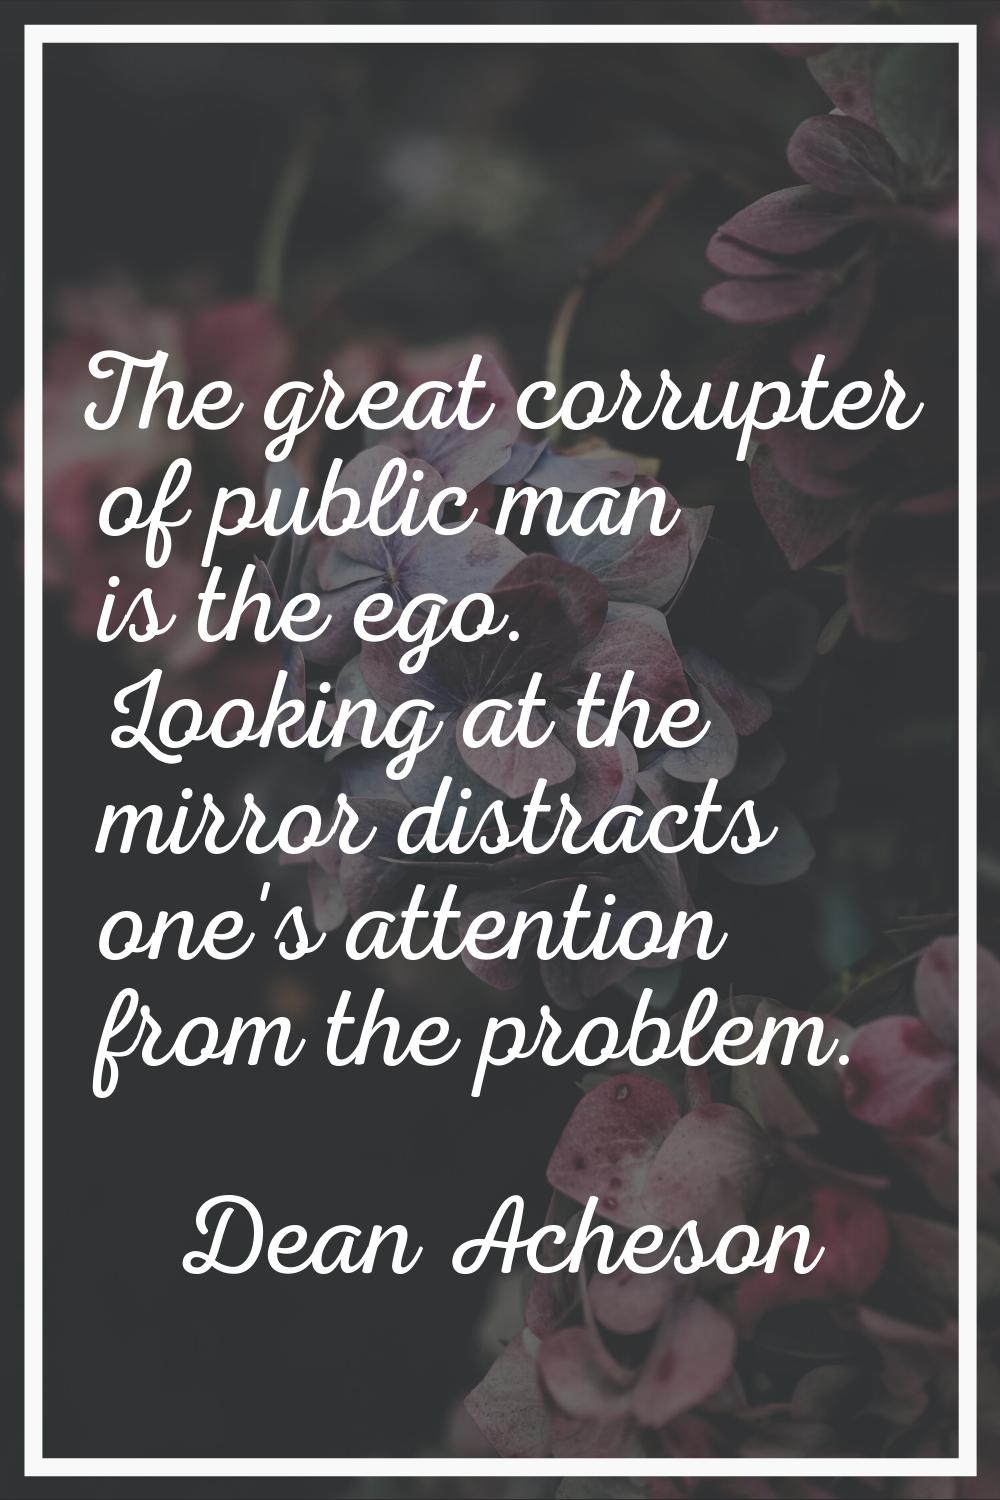 The great corrupter of public man is the ego. Looking at the mirror distracts one's attention from 